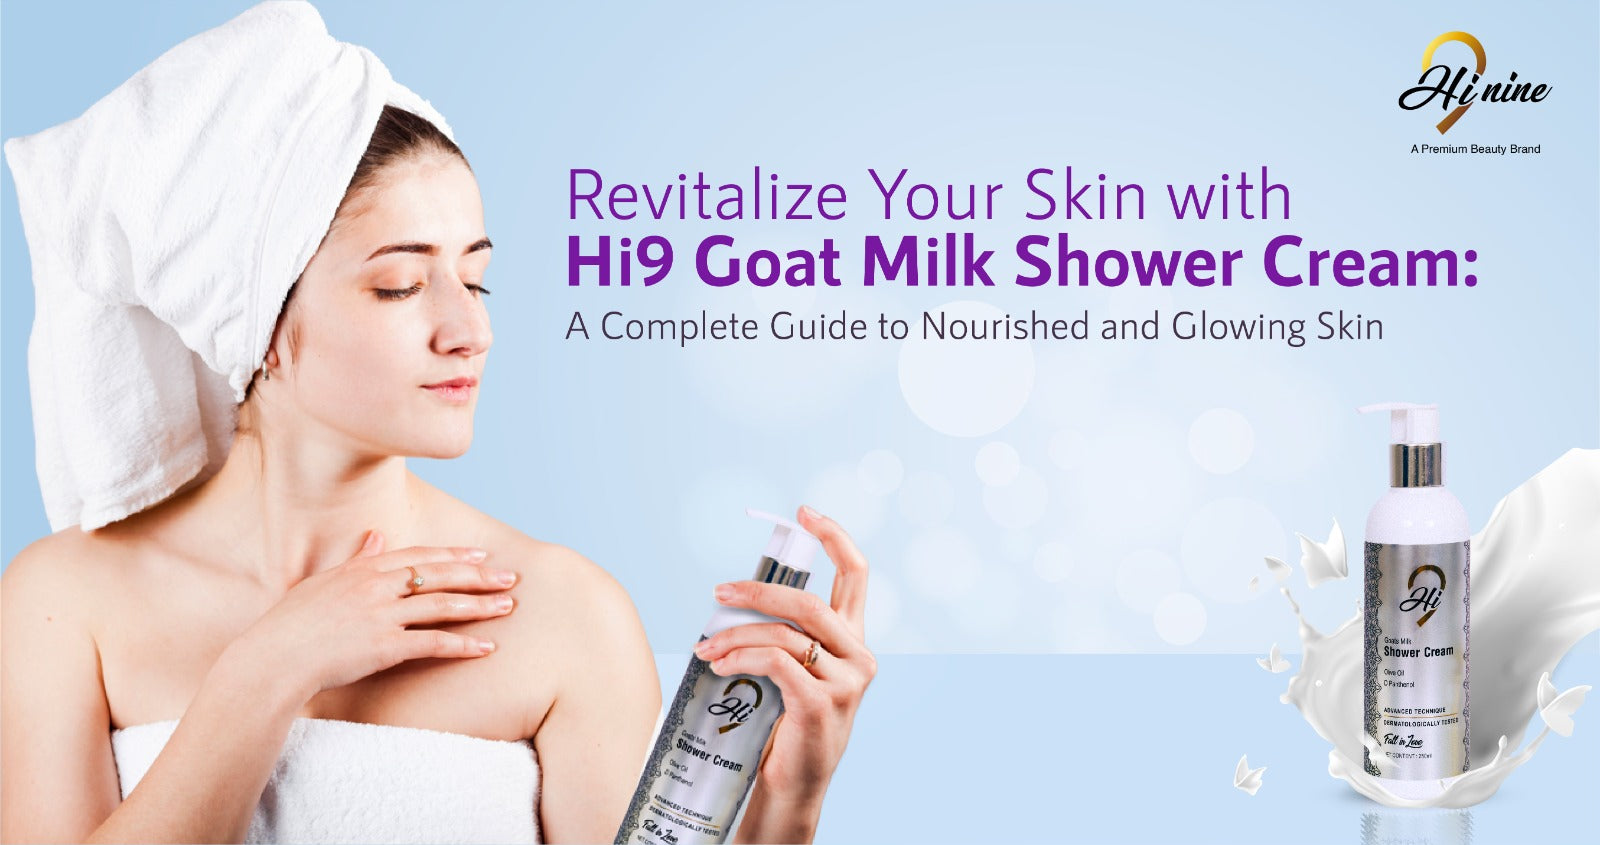 Revitalize Your Skin with Hi9 Goat Milk Shower Cream: A Complete Guide to Nourished and Glowing Skin